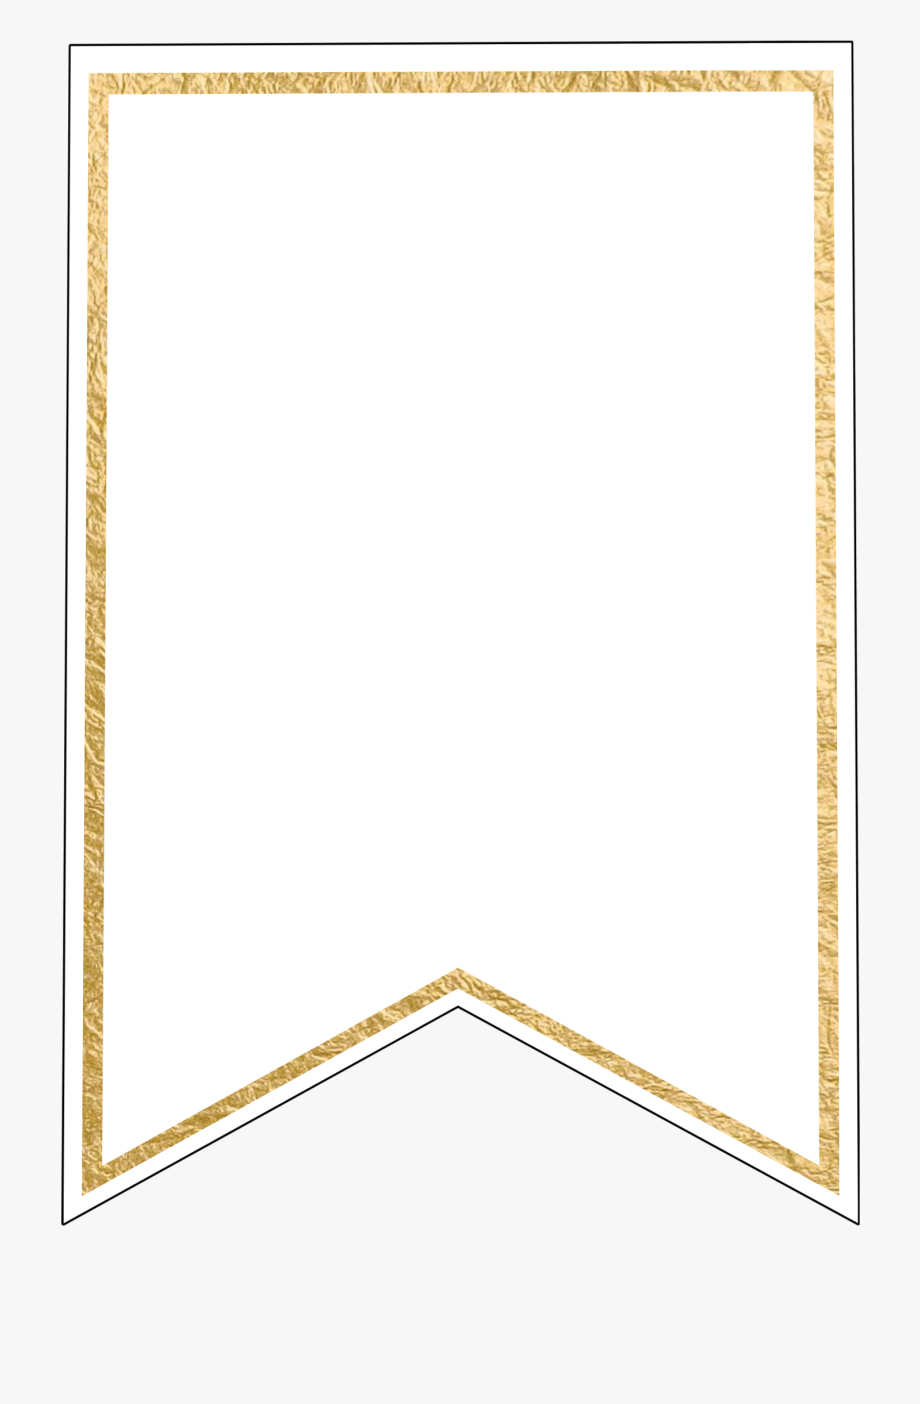 Free Pennant Banner Template, Download Free Clip Art, – Gold Pertaining To Free Printable Pennant Banner Template